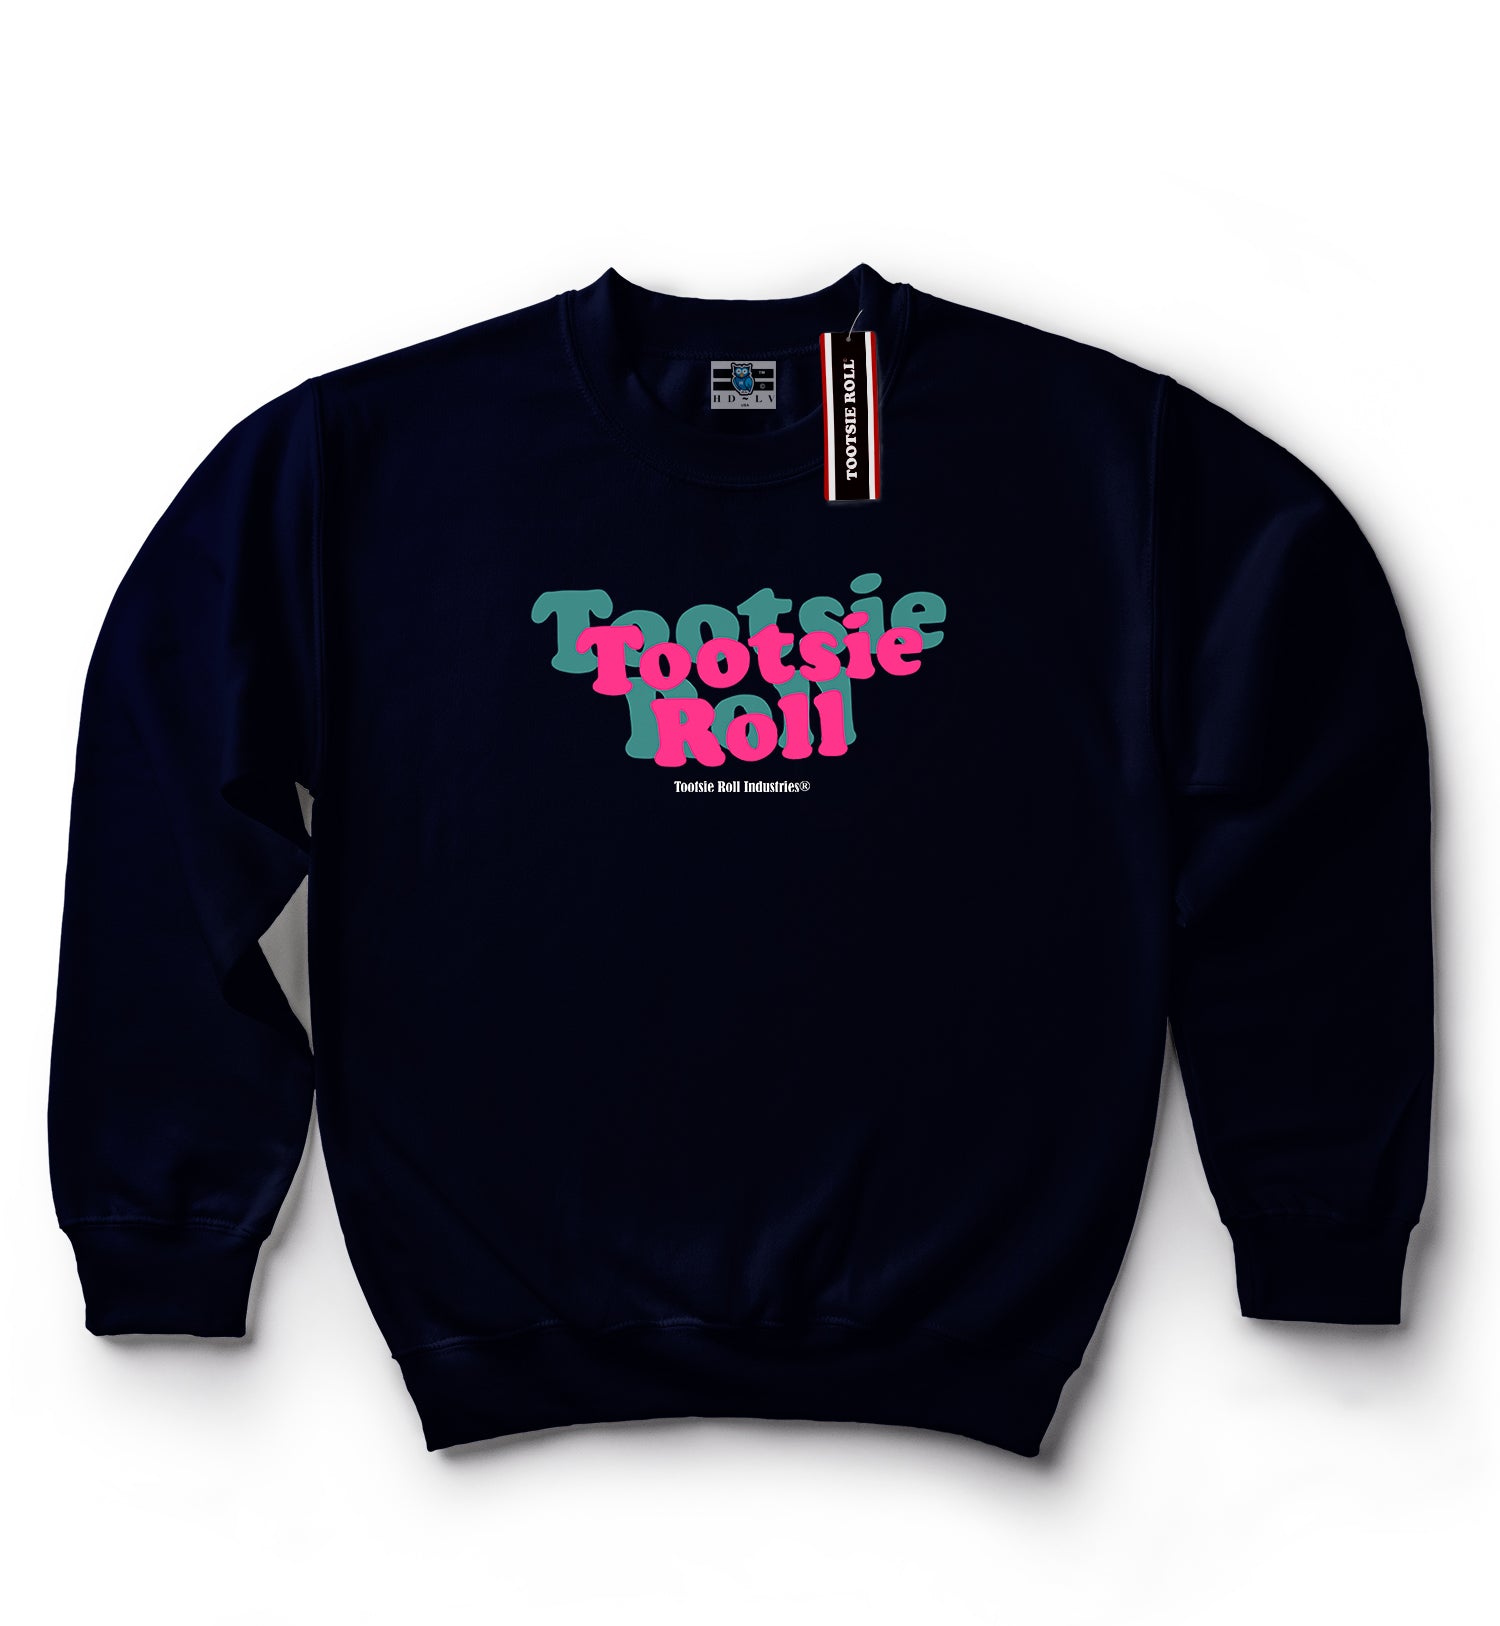 Shop and Buy 1990s Inspired Clothes | Tootsie Roll Fresh | Crewneck Sweat Shirt